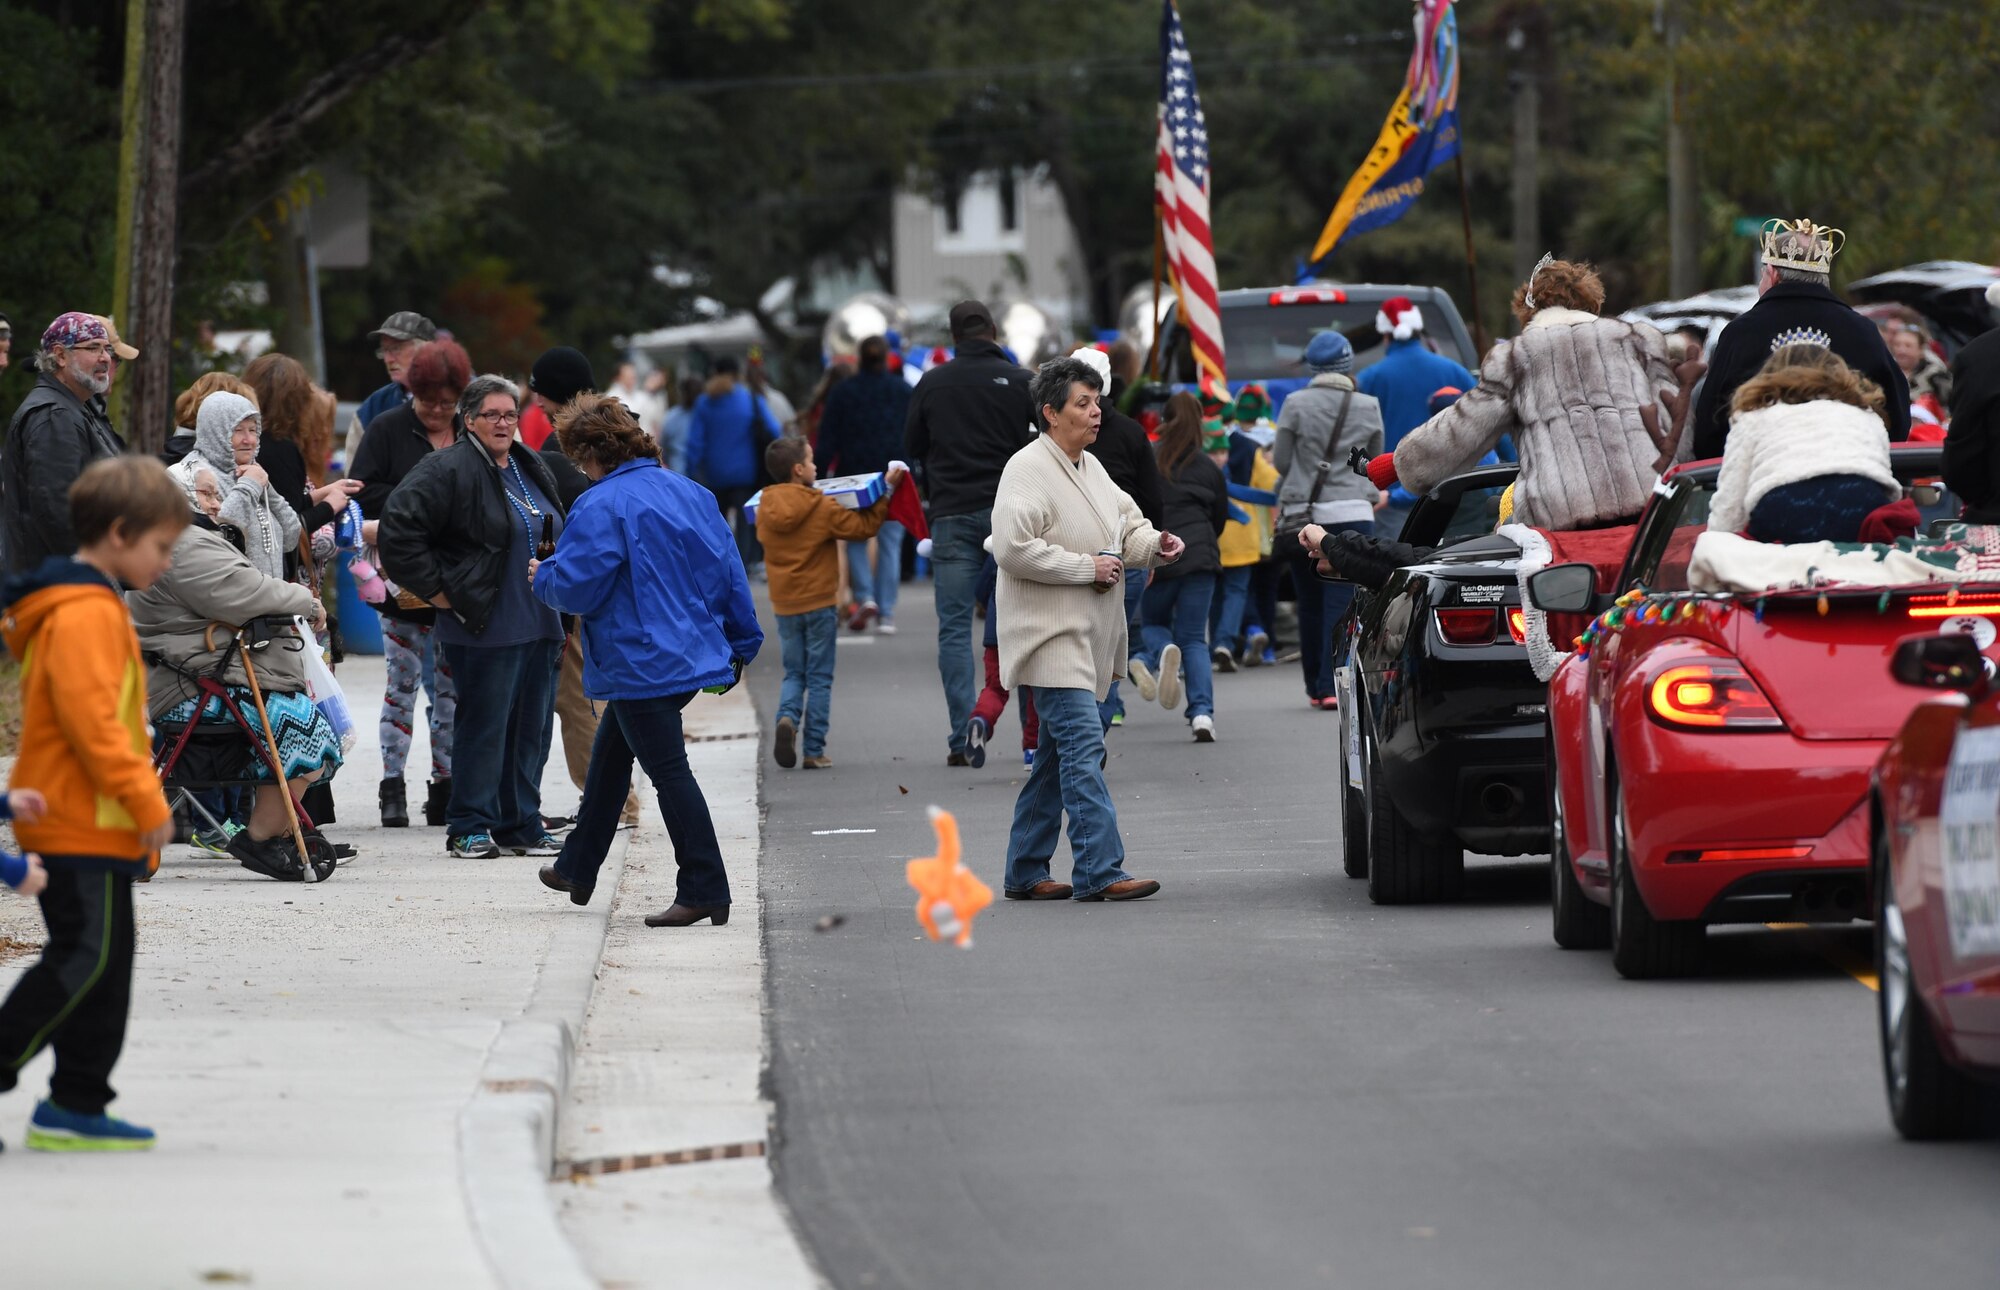 Residents attend the Ocean Springs Christmas Parade in Ocean Springs, Mississippi, Dec. 9, 2018. The Keesler Air Force Base Honor Guard and 81st Training Group Airmen participated in the event. (U.S. Air Force photo by Kemberly Groue)